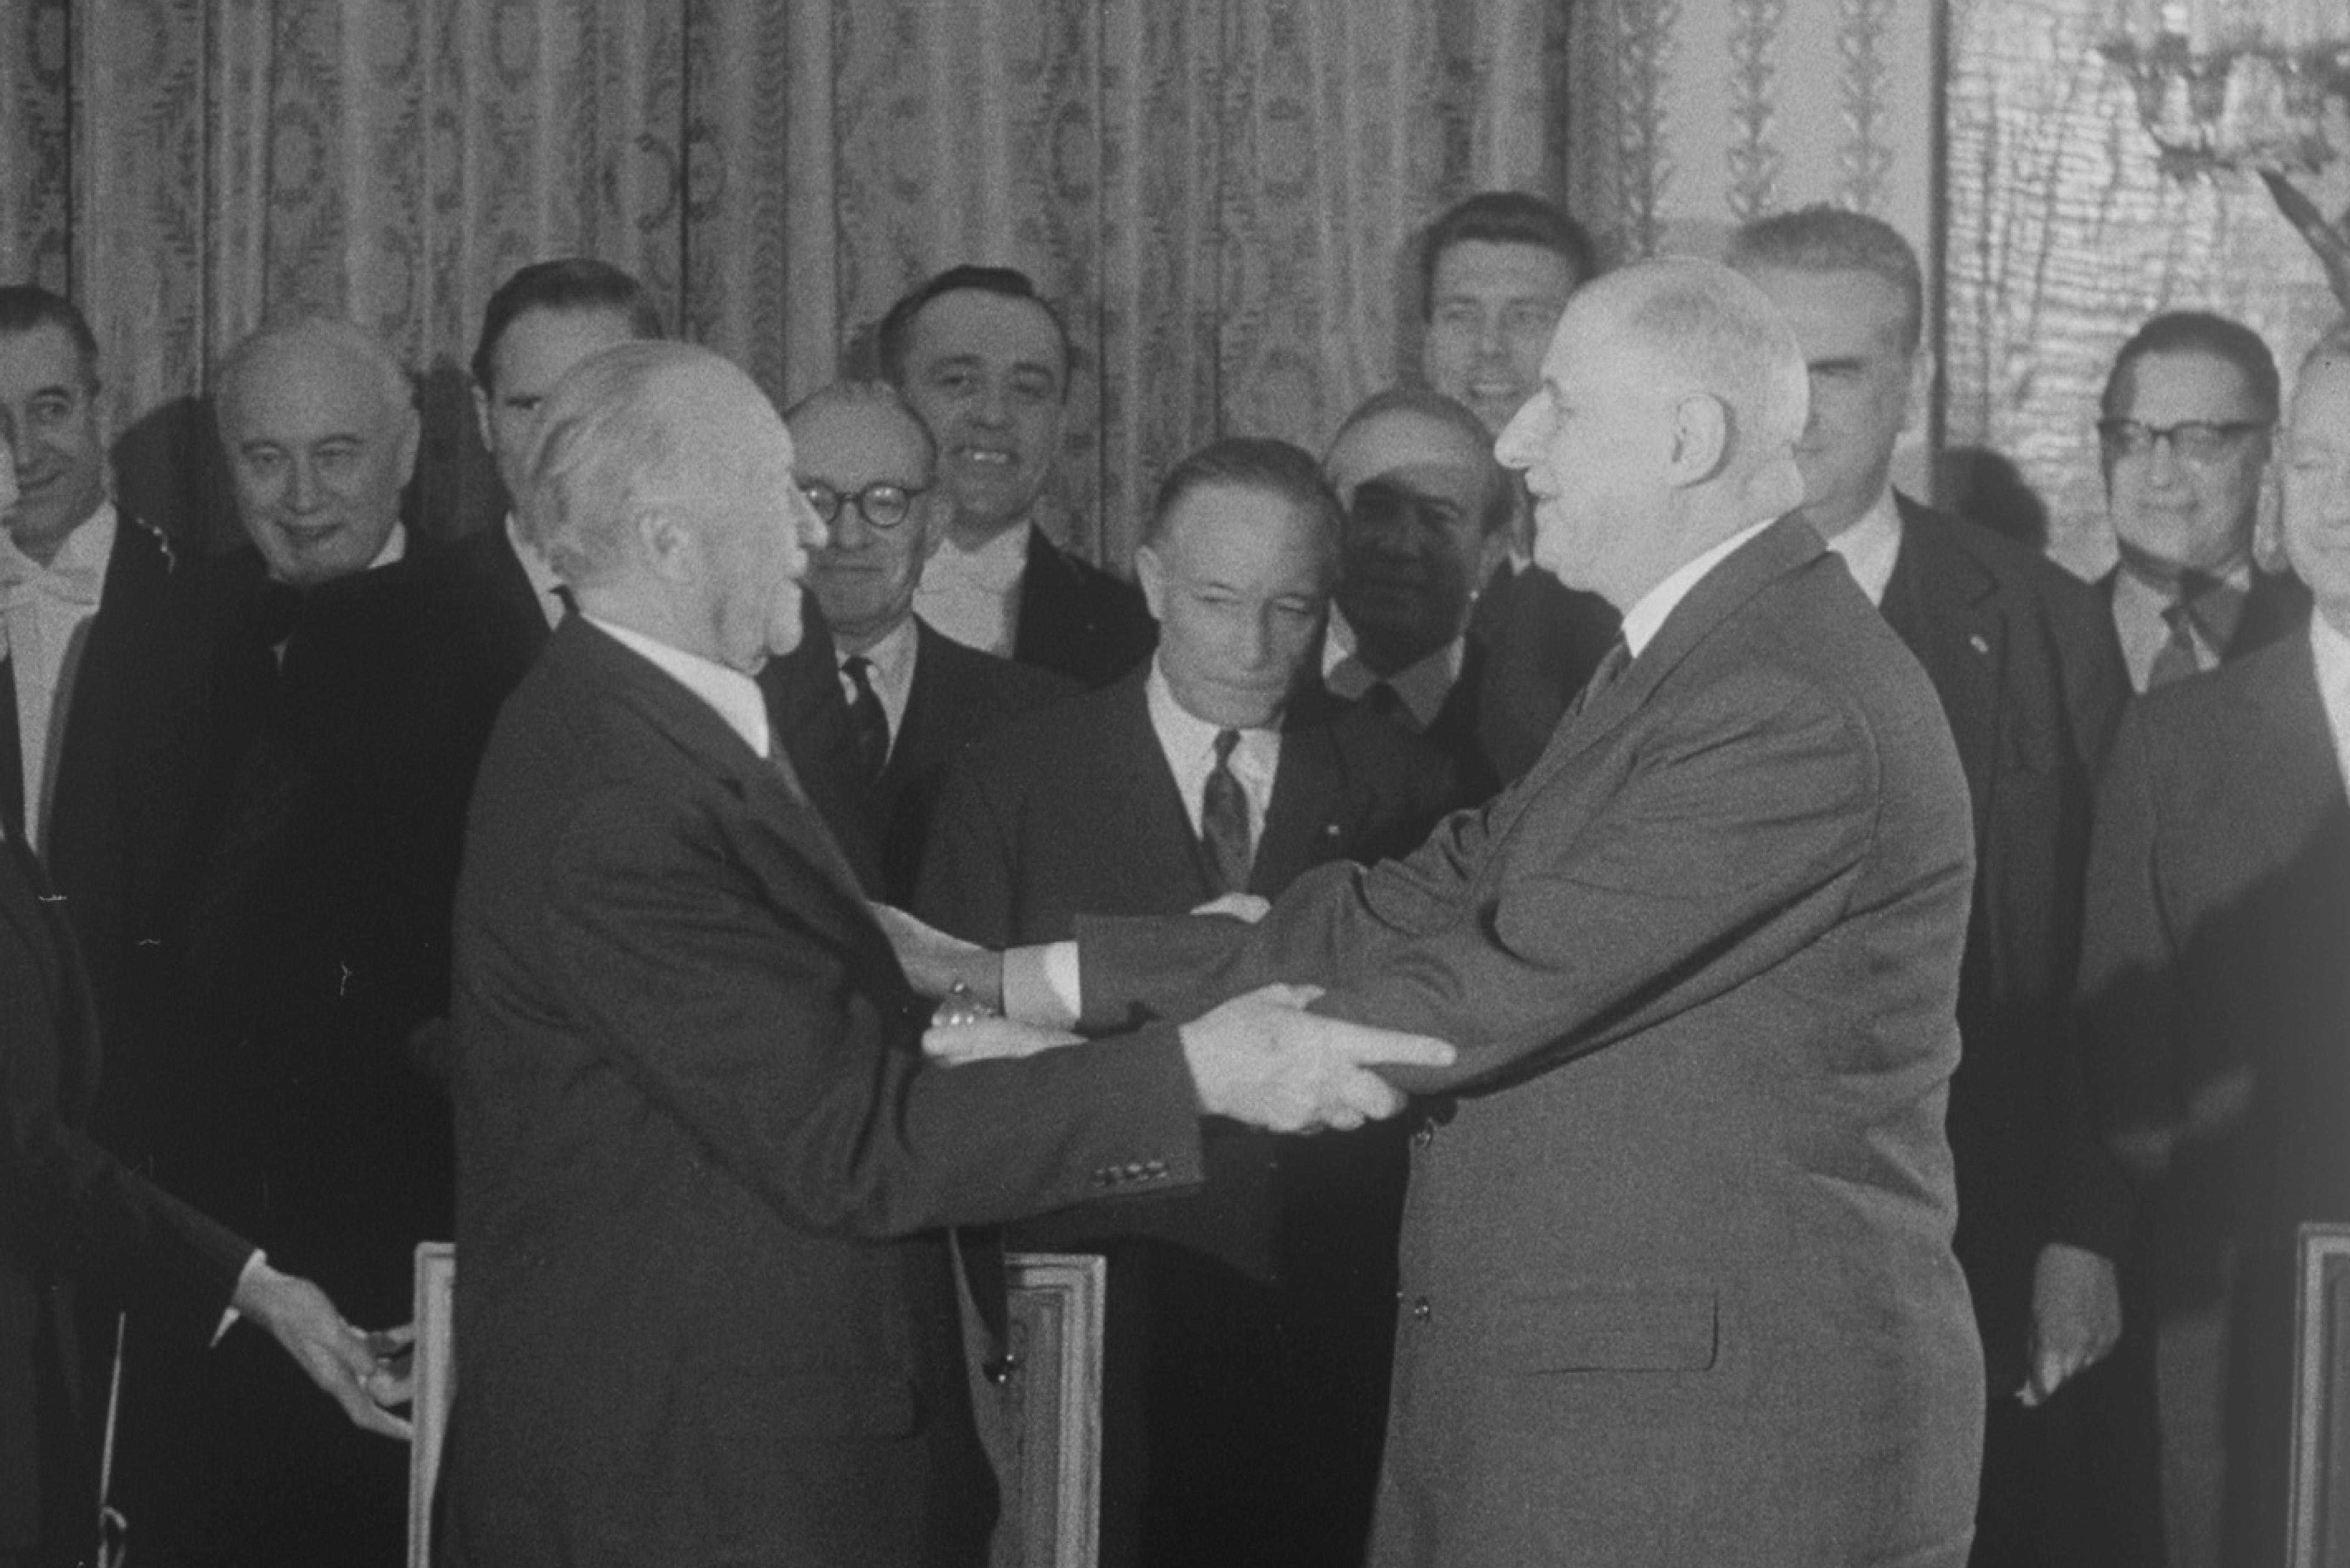 Black-and-white photo: German Chancellor Konrad Adenauer and French President Charles de Gaulle, both in suits, are shaking hands, smiling at each other. Behind them stand about 10 men watching them, all wearing suits.  